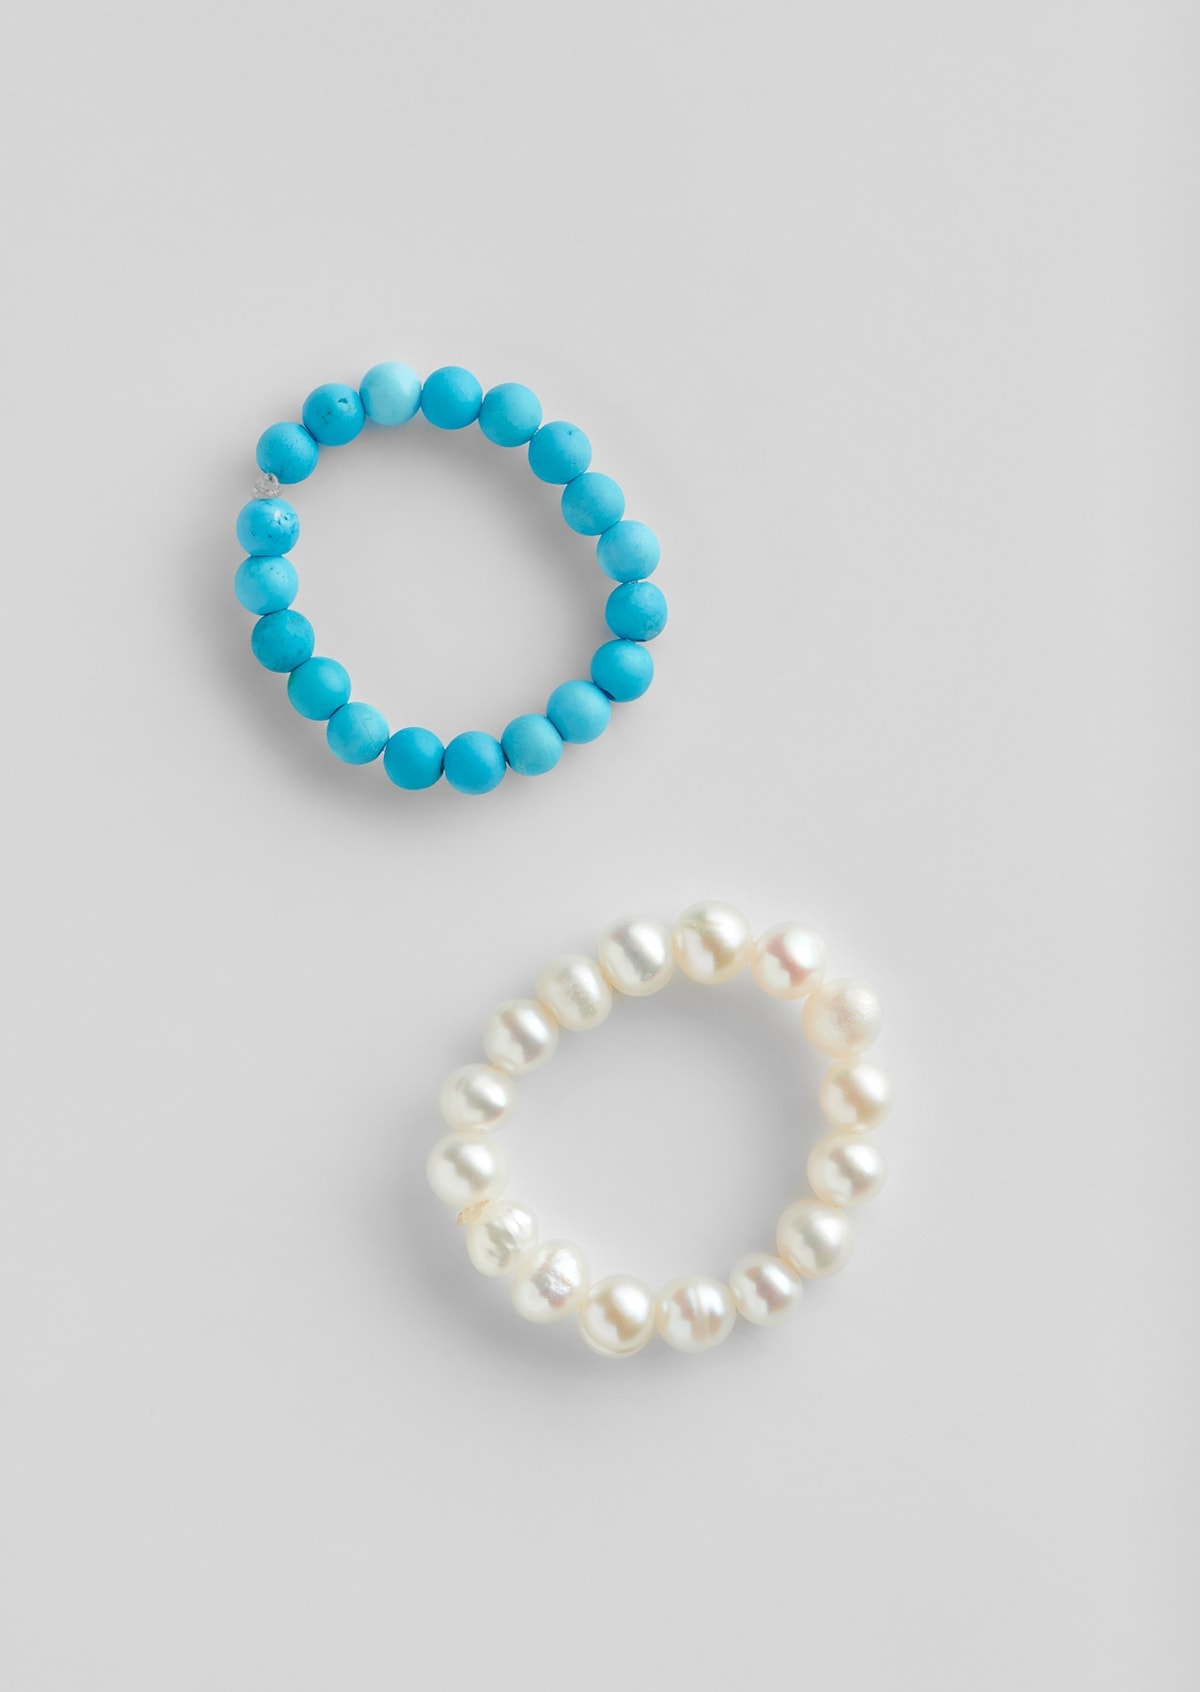 Charis Pearl Turquoise Ring Set of 2